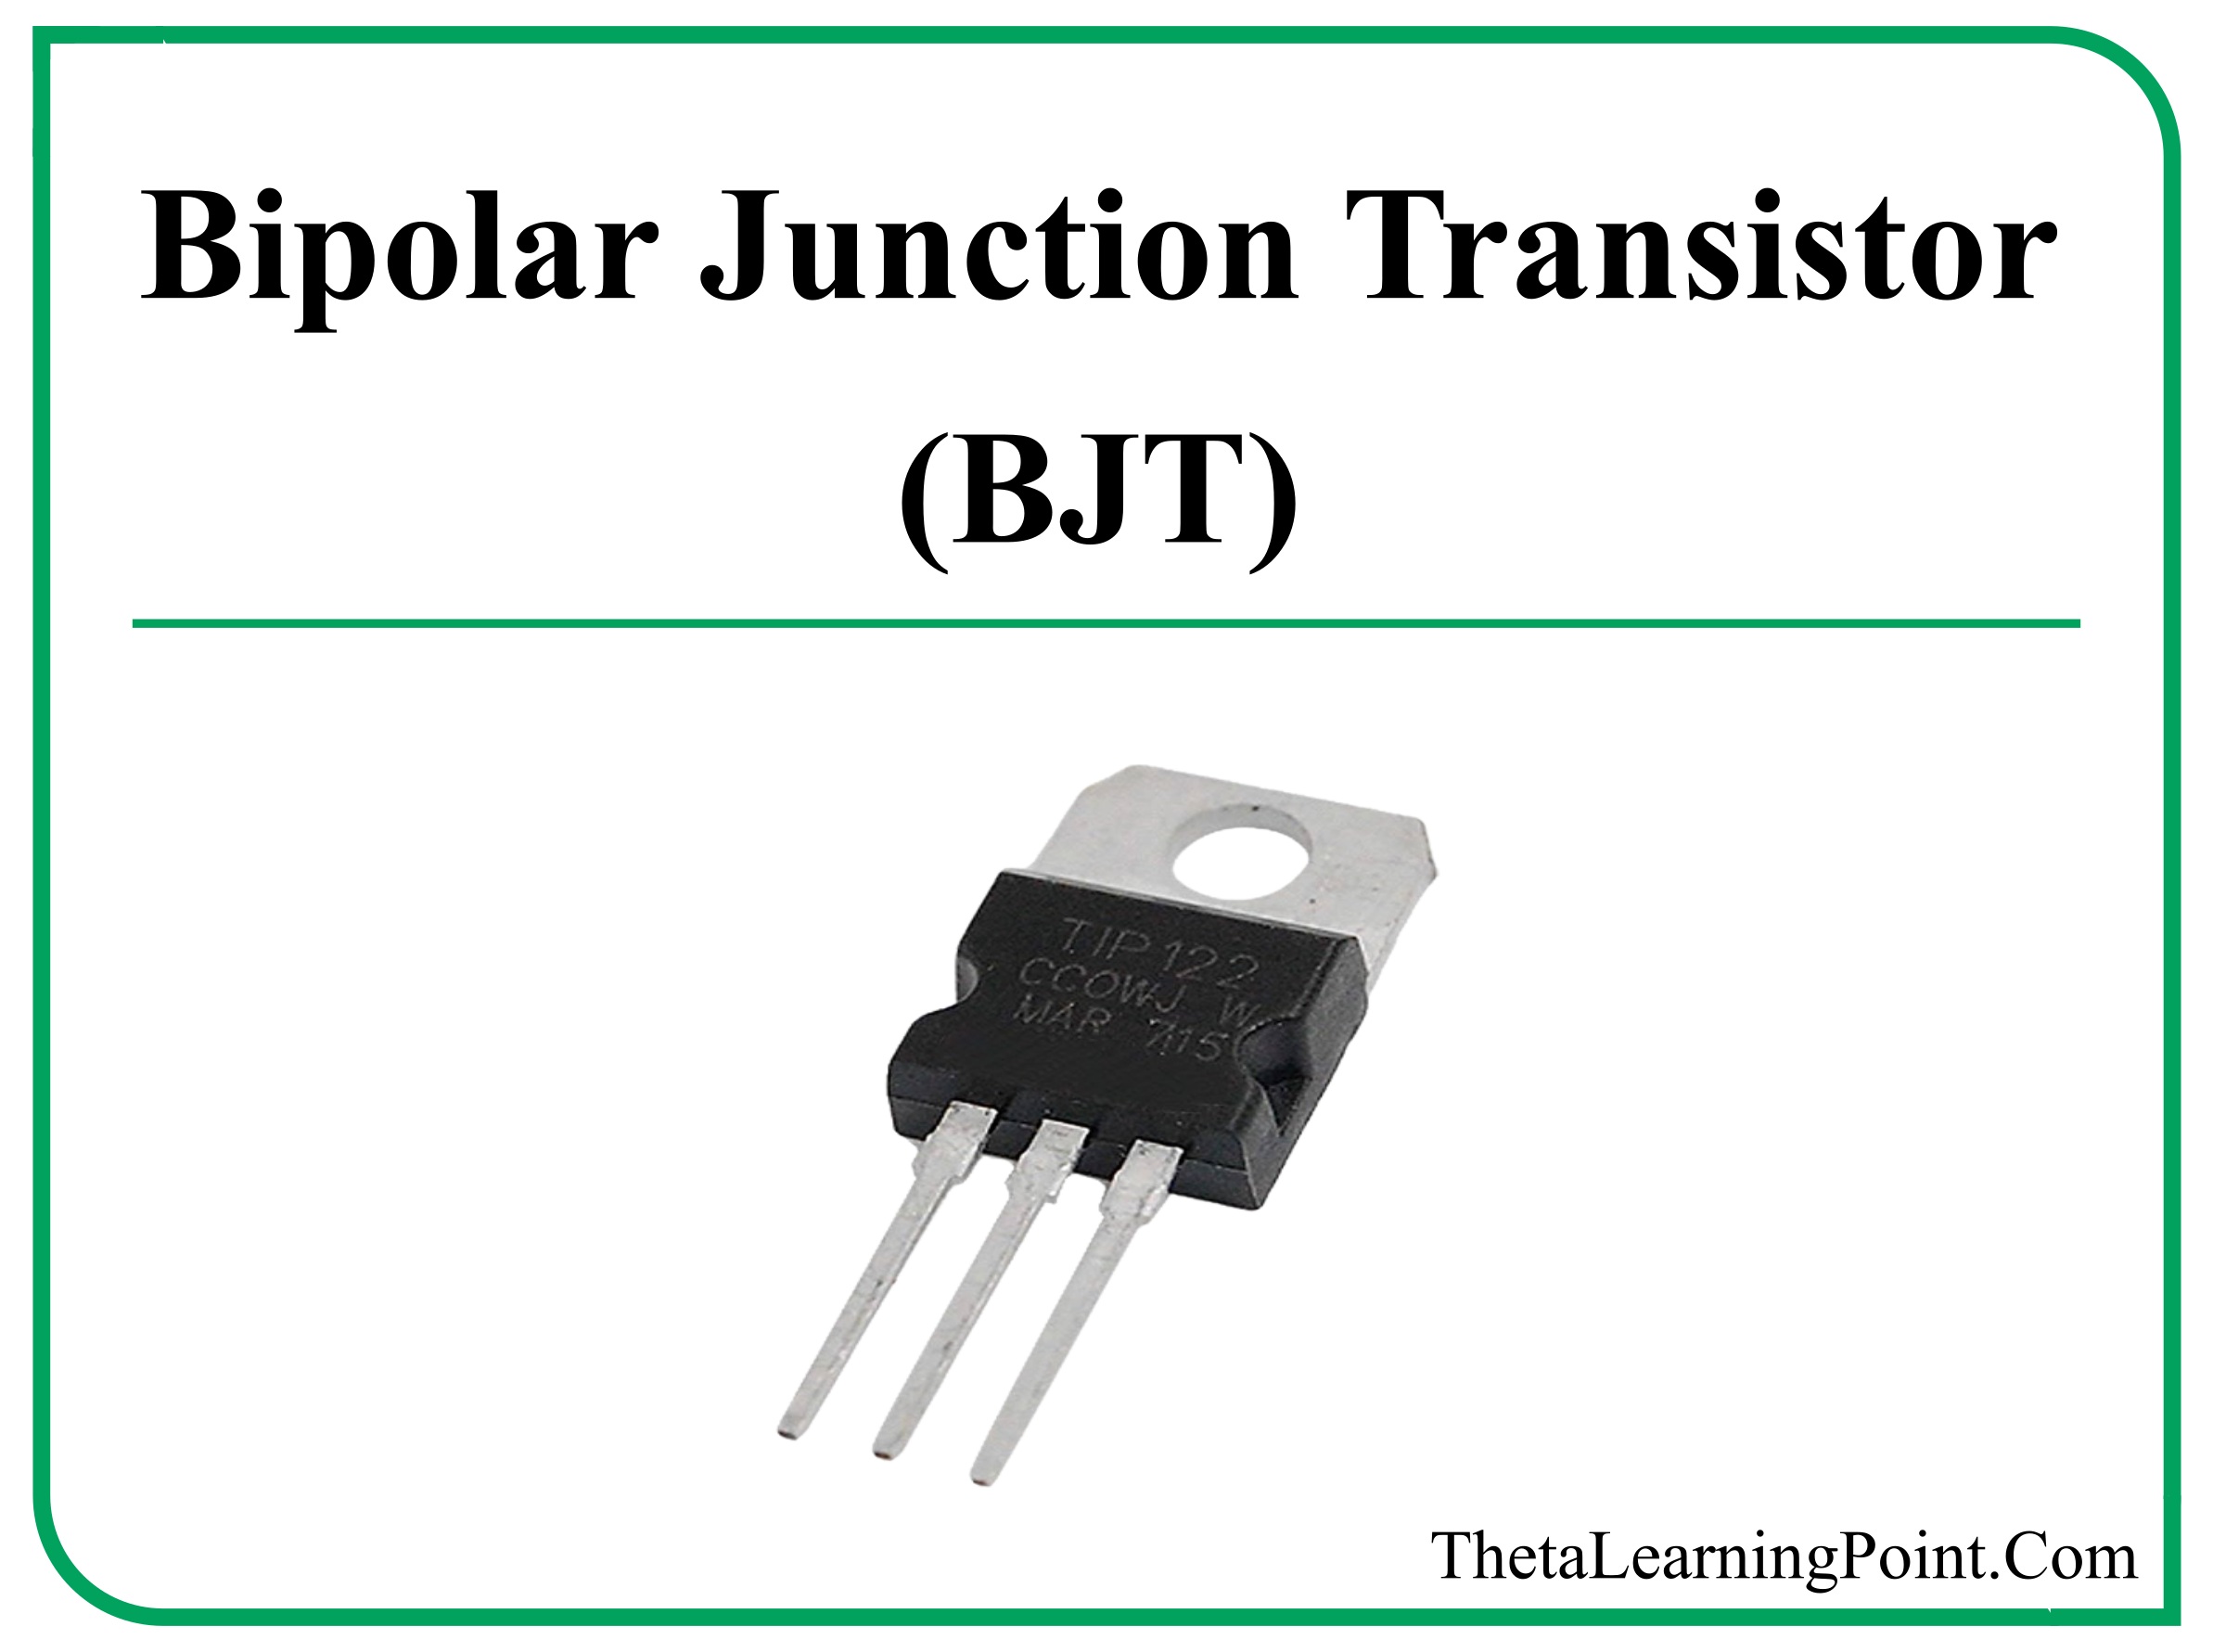 What is a Bipolar Junction Transistor (BJT)